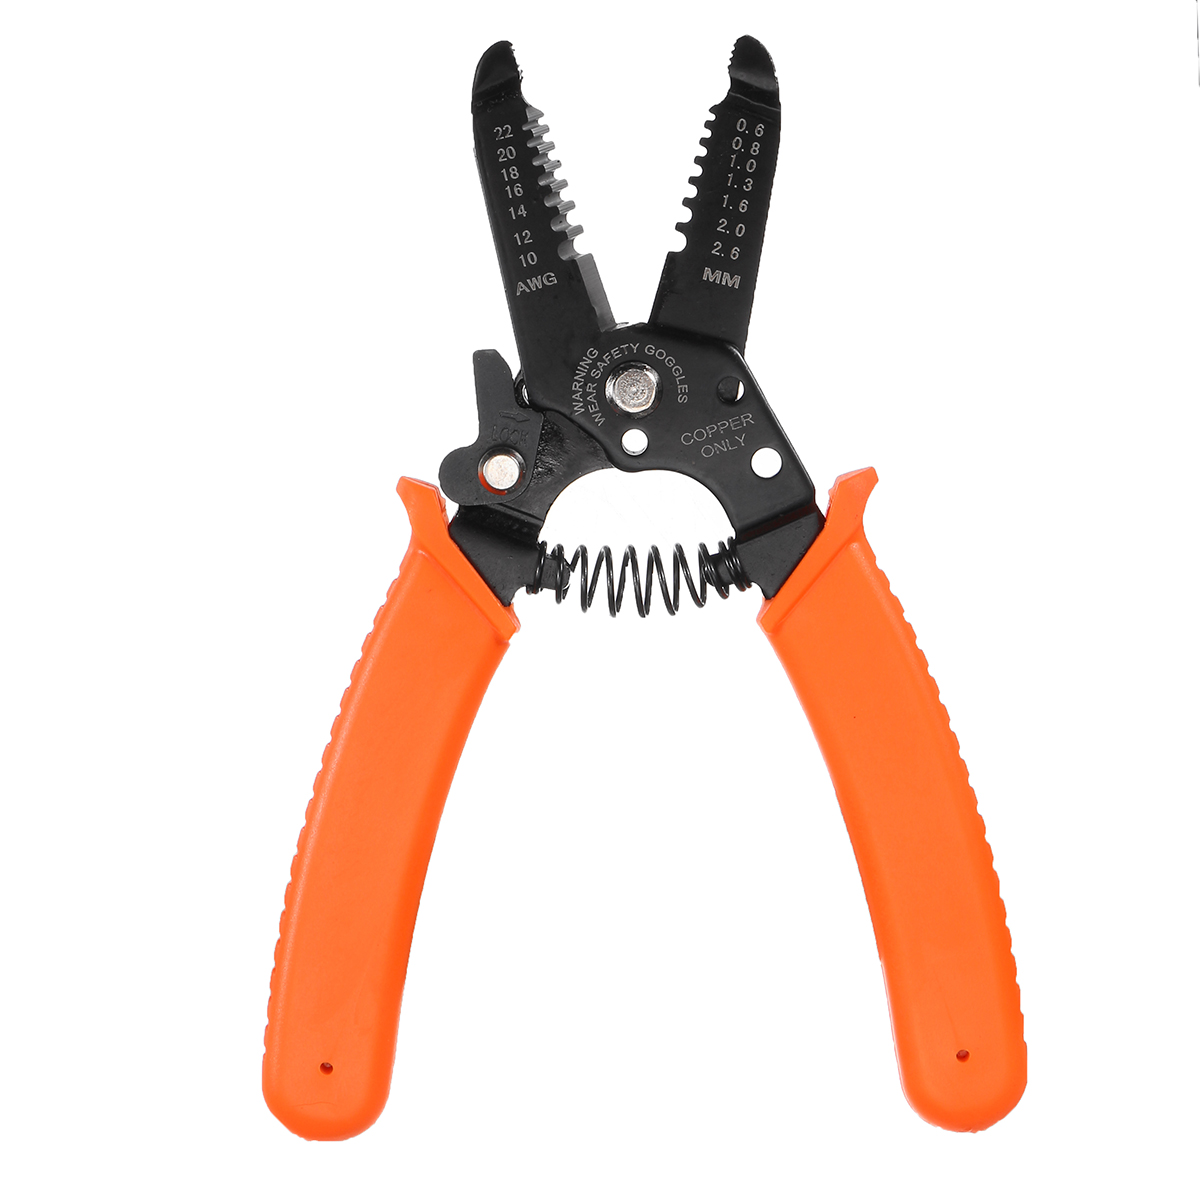 Cable-Wire-Stripper-Cutter-Crimper-Auto-Multi-Functional-Pliers-Tool-1638332-6